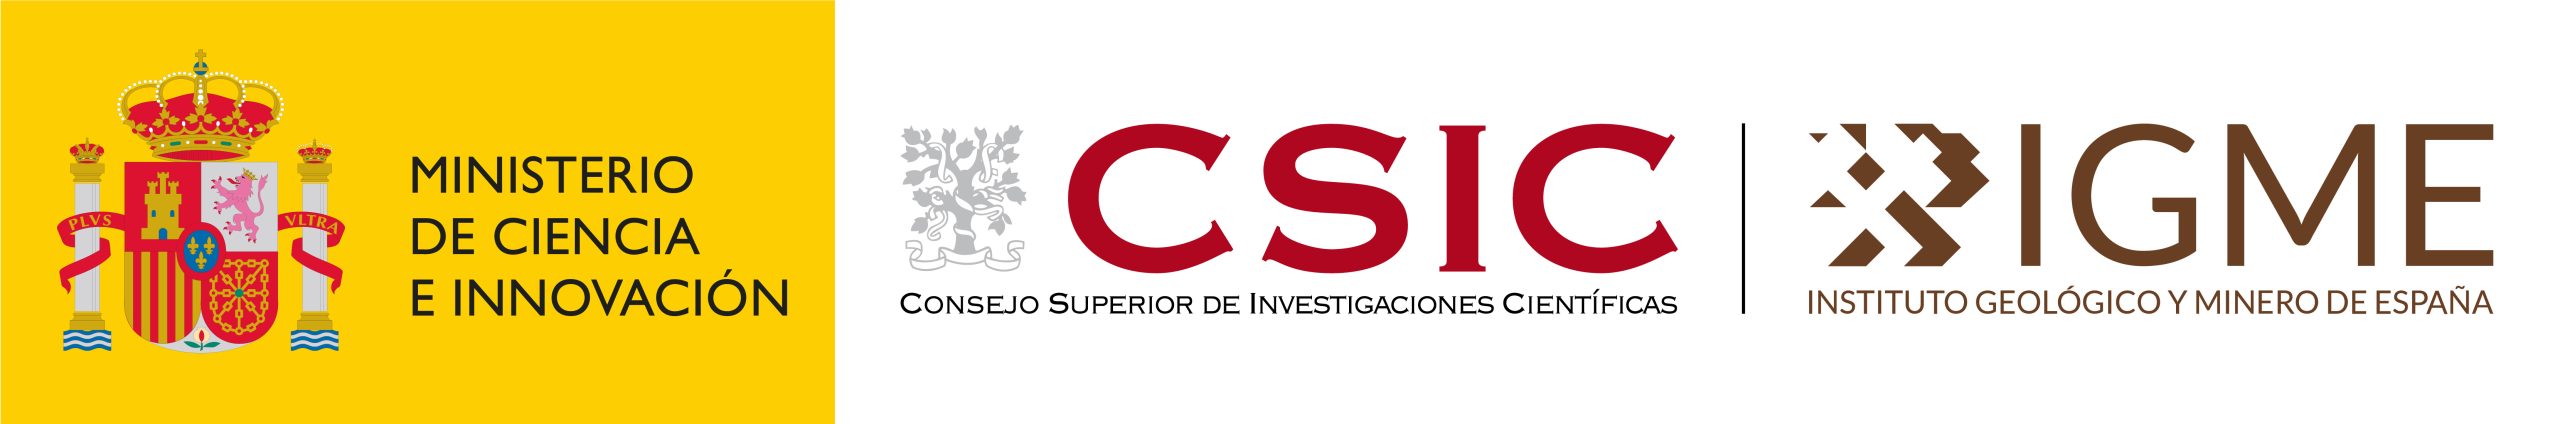 IGME-CSIC The Spanish Geological and Mining Institute -Spanish National Research Council